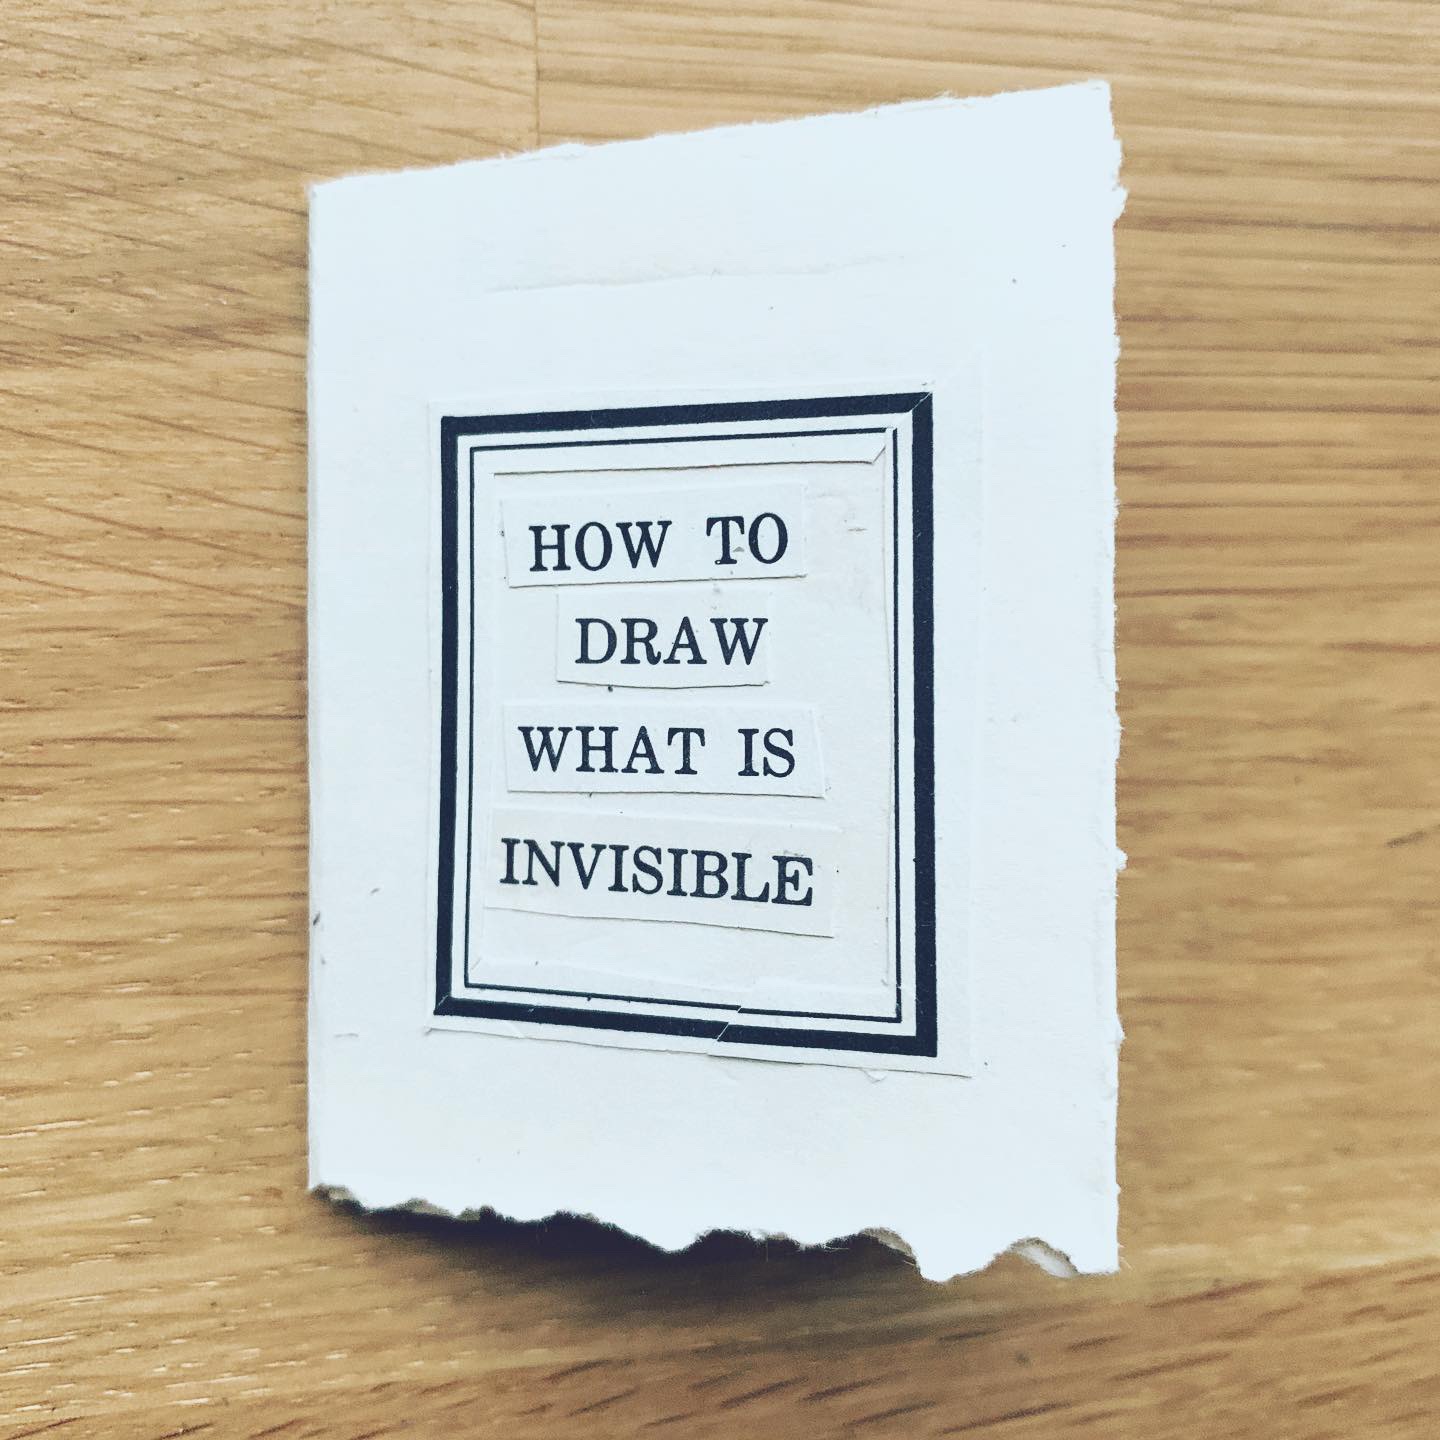 How to draw what is invisible Austin Kleon